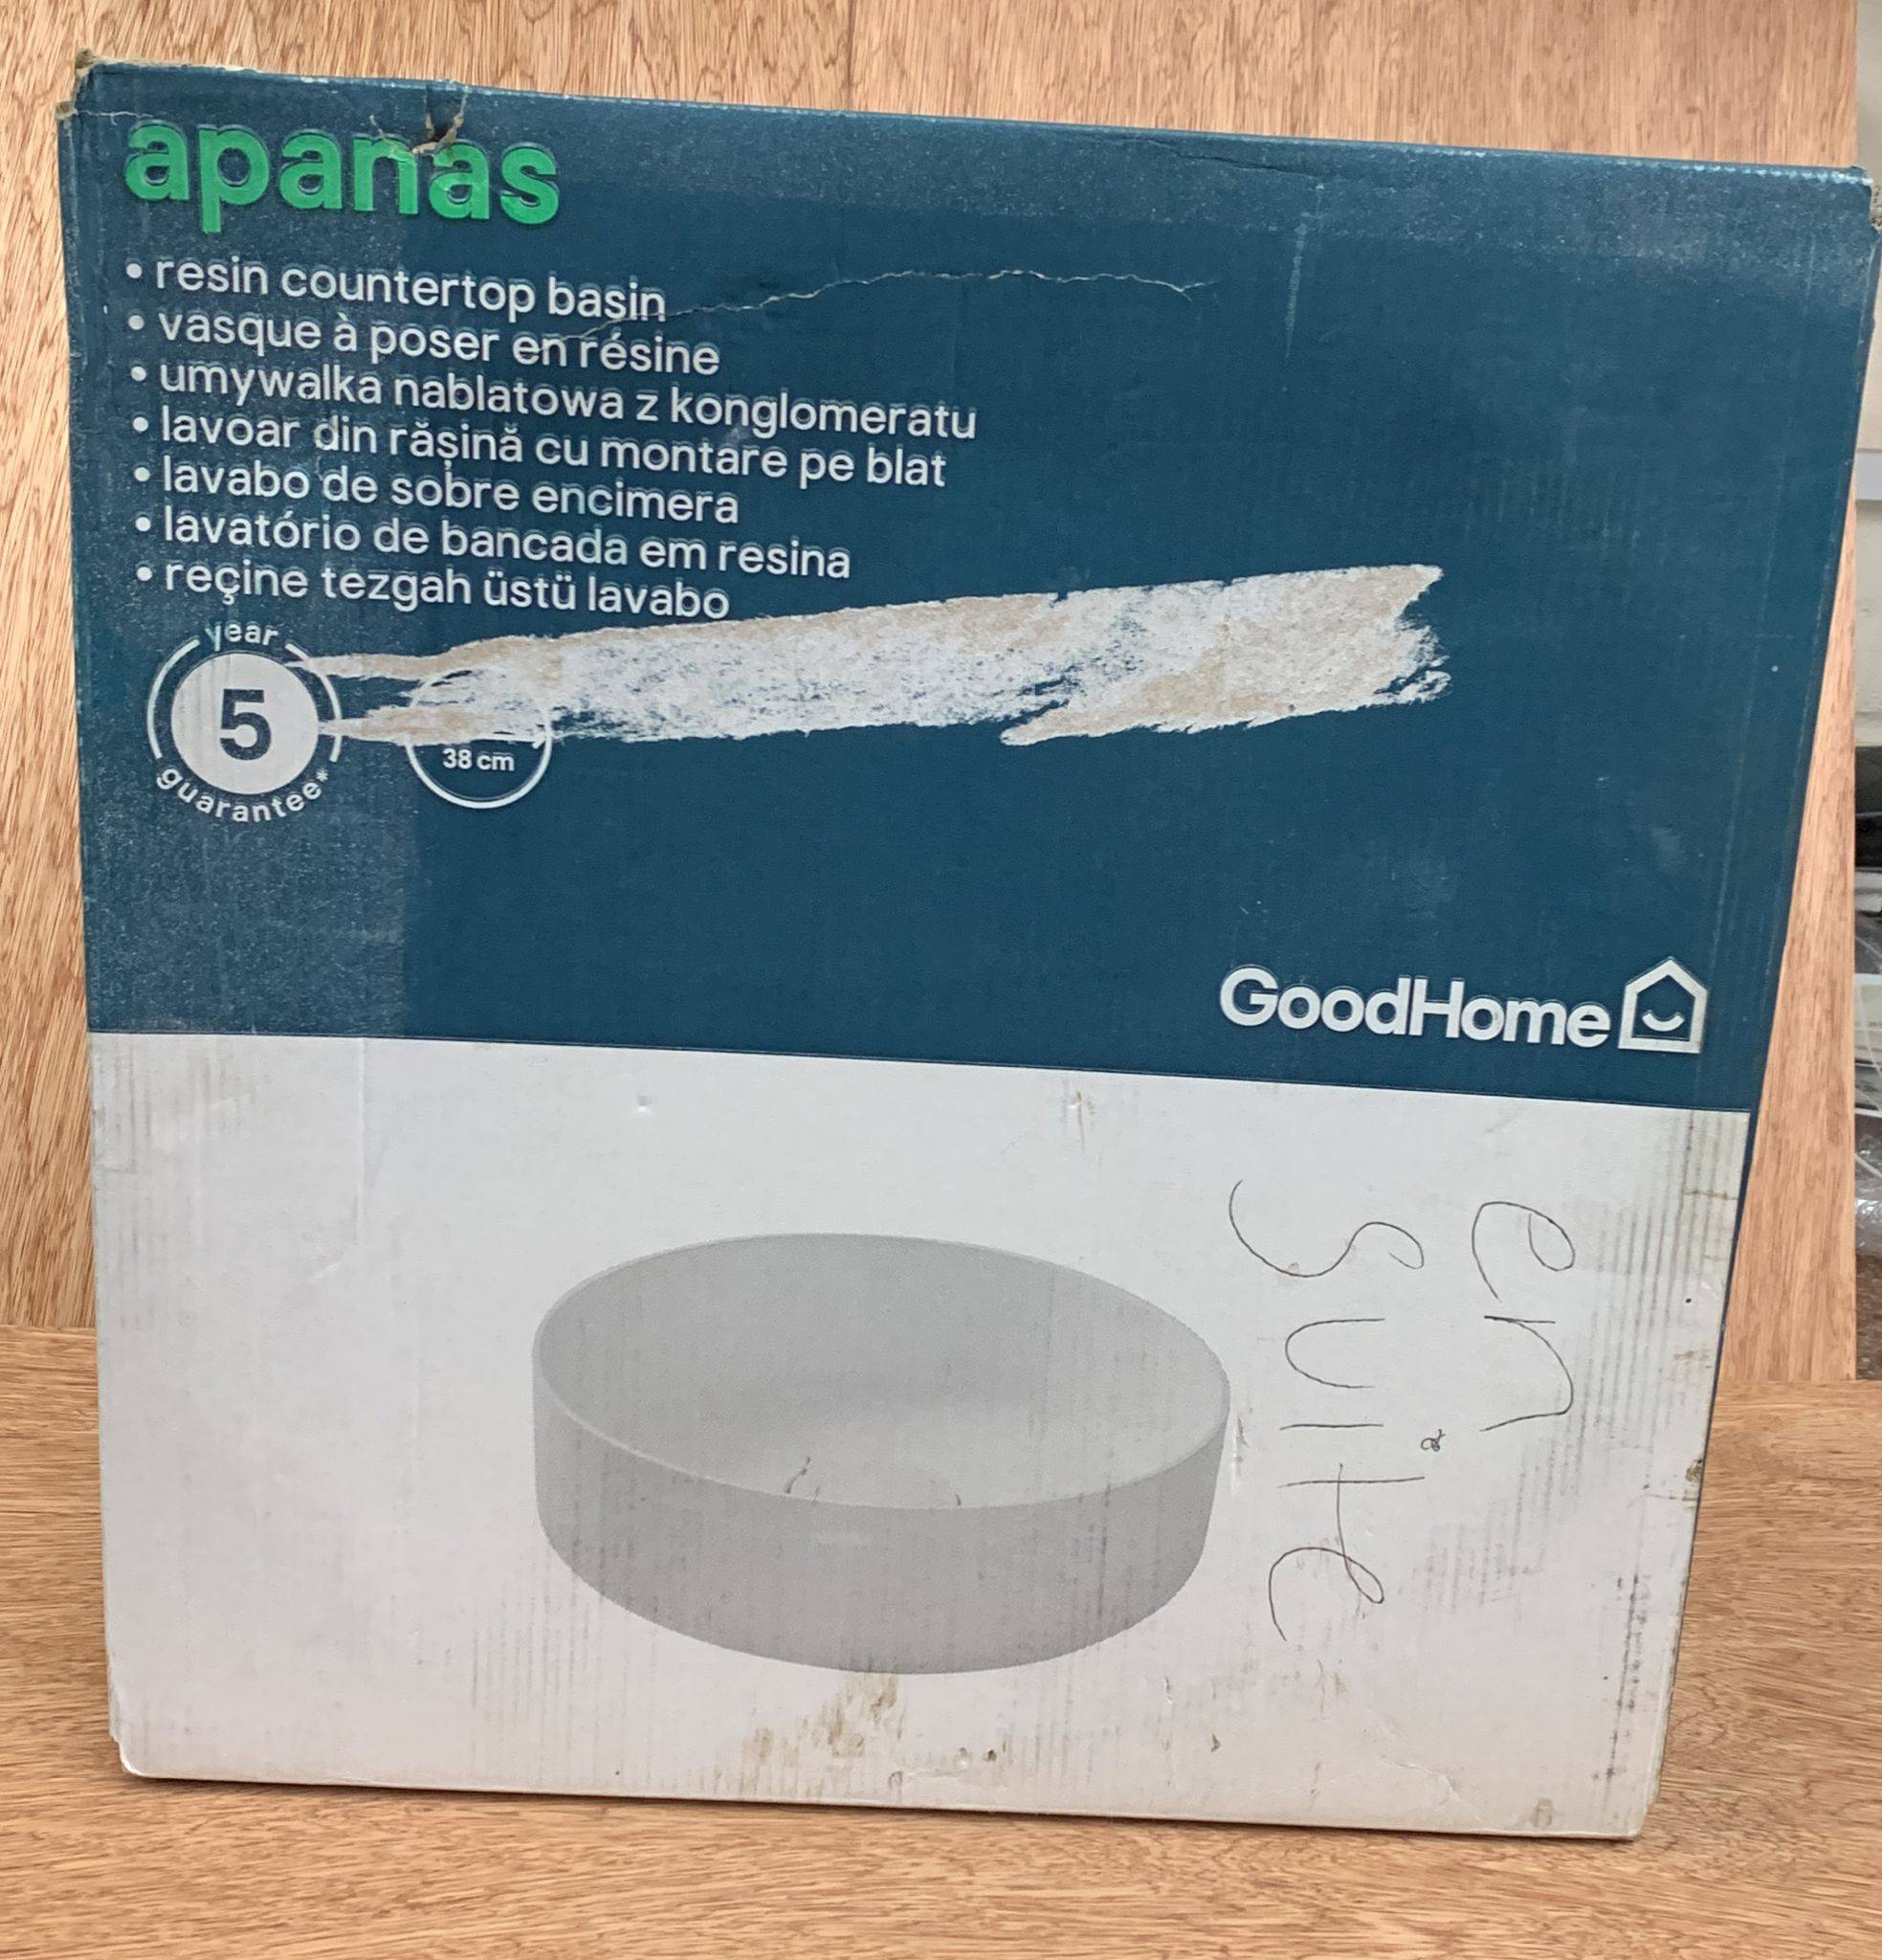 GoodHome Apanas White Round Counter-mounted Counter top Basin (W)38cm 7691